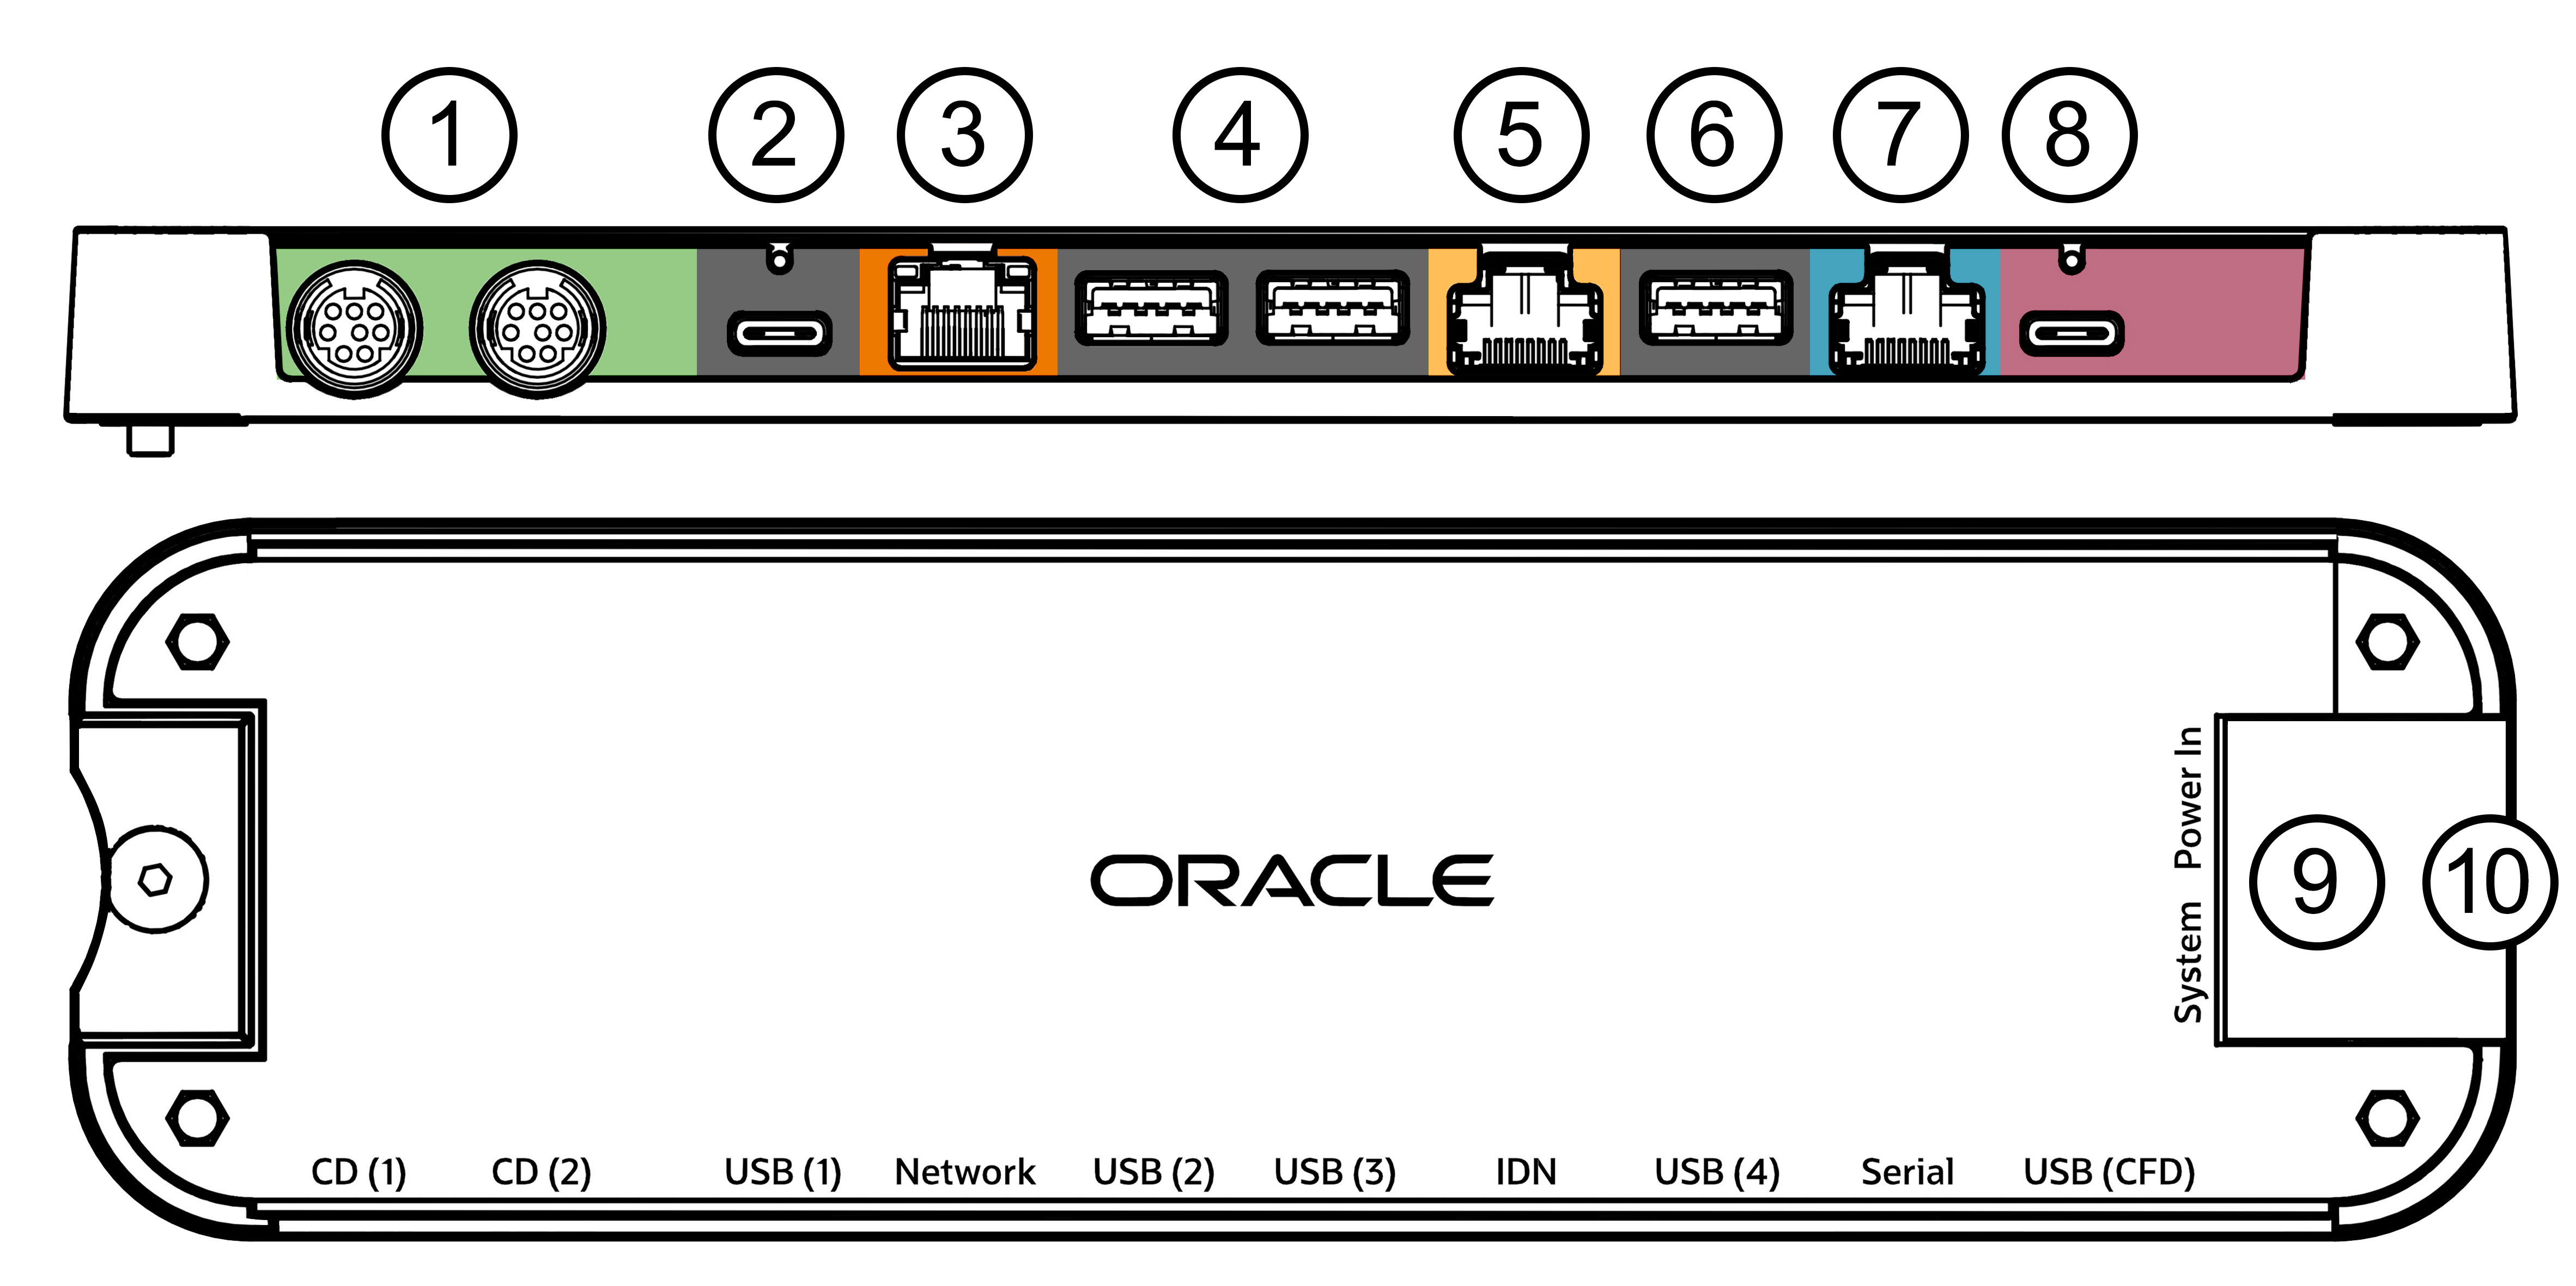 This figure shows the Peripheral Expansion Module ports.